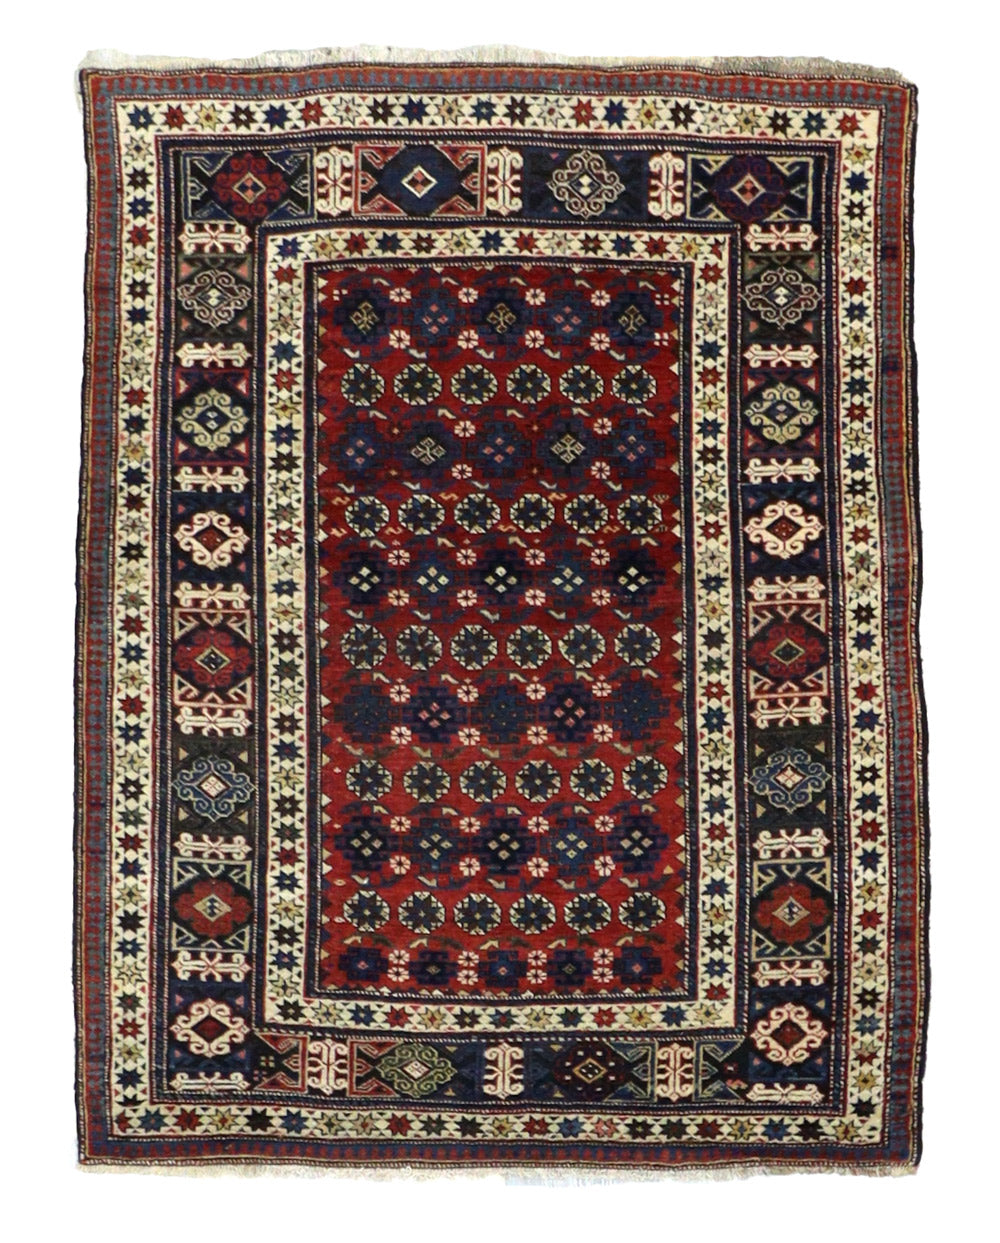 Antique Chi Chi Handwoven Tribal Rug